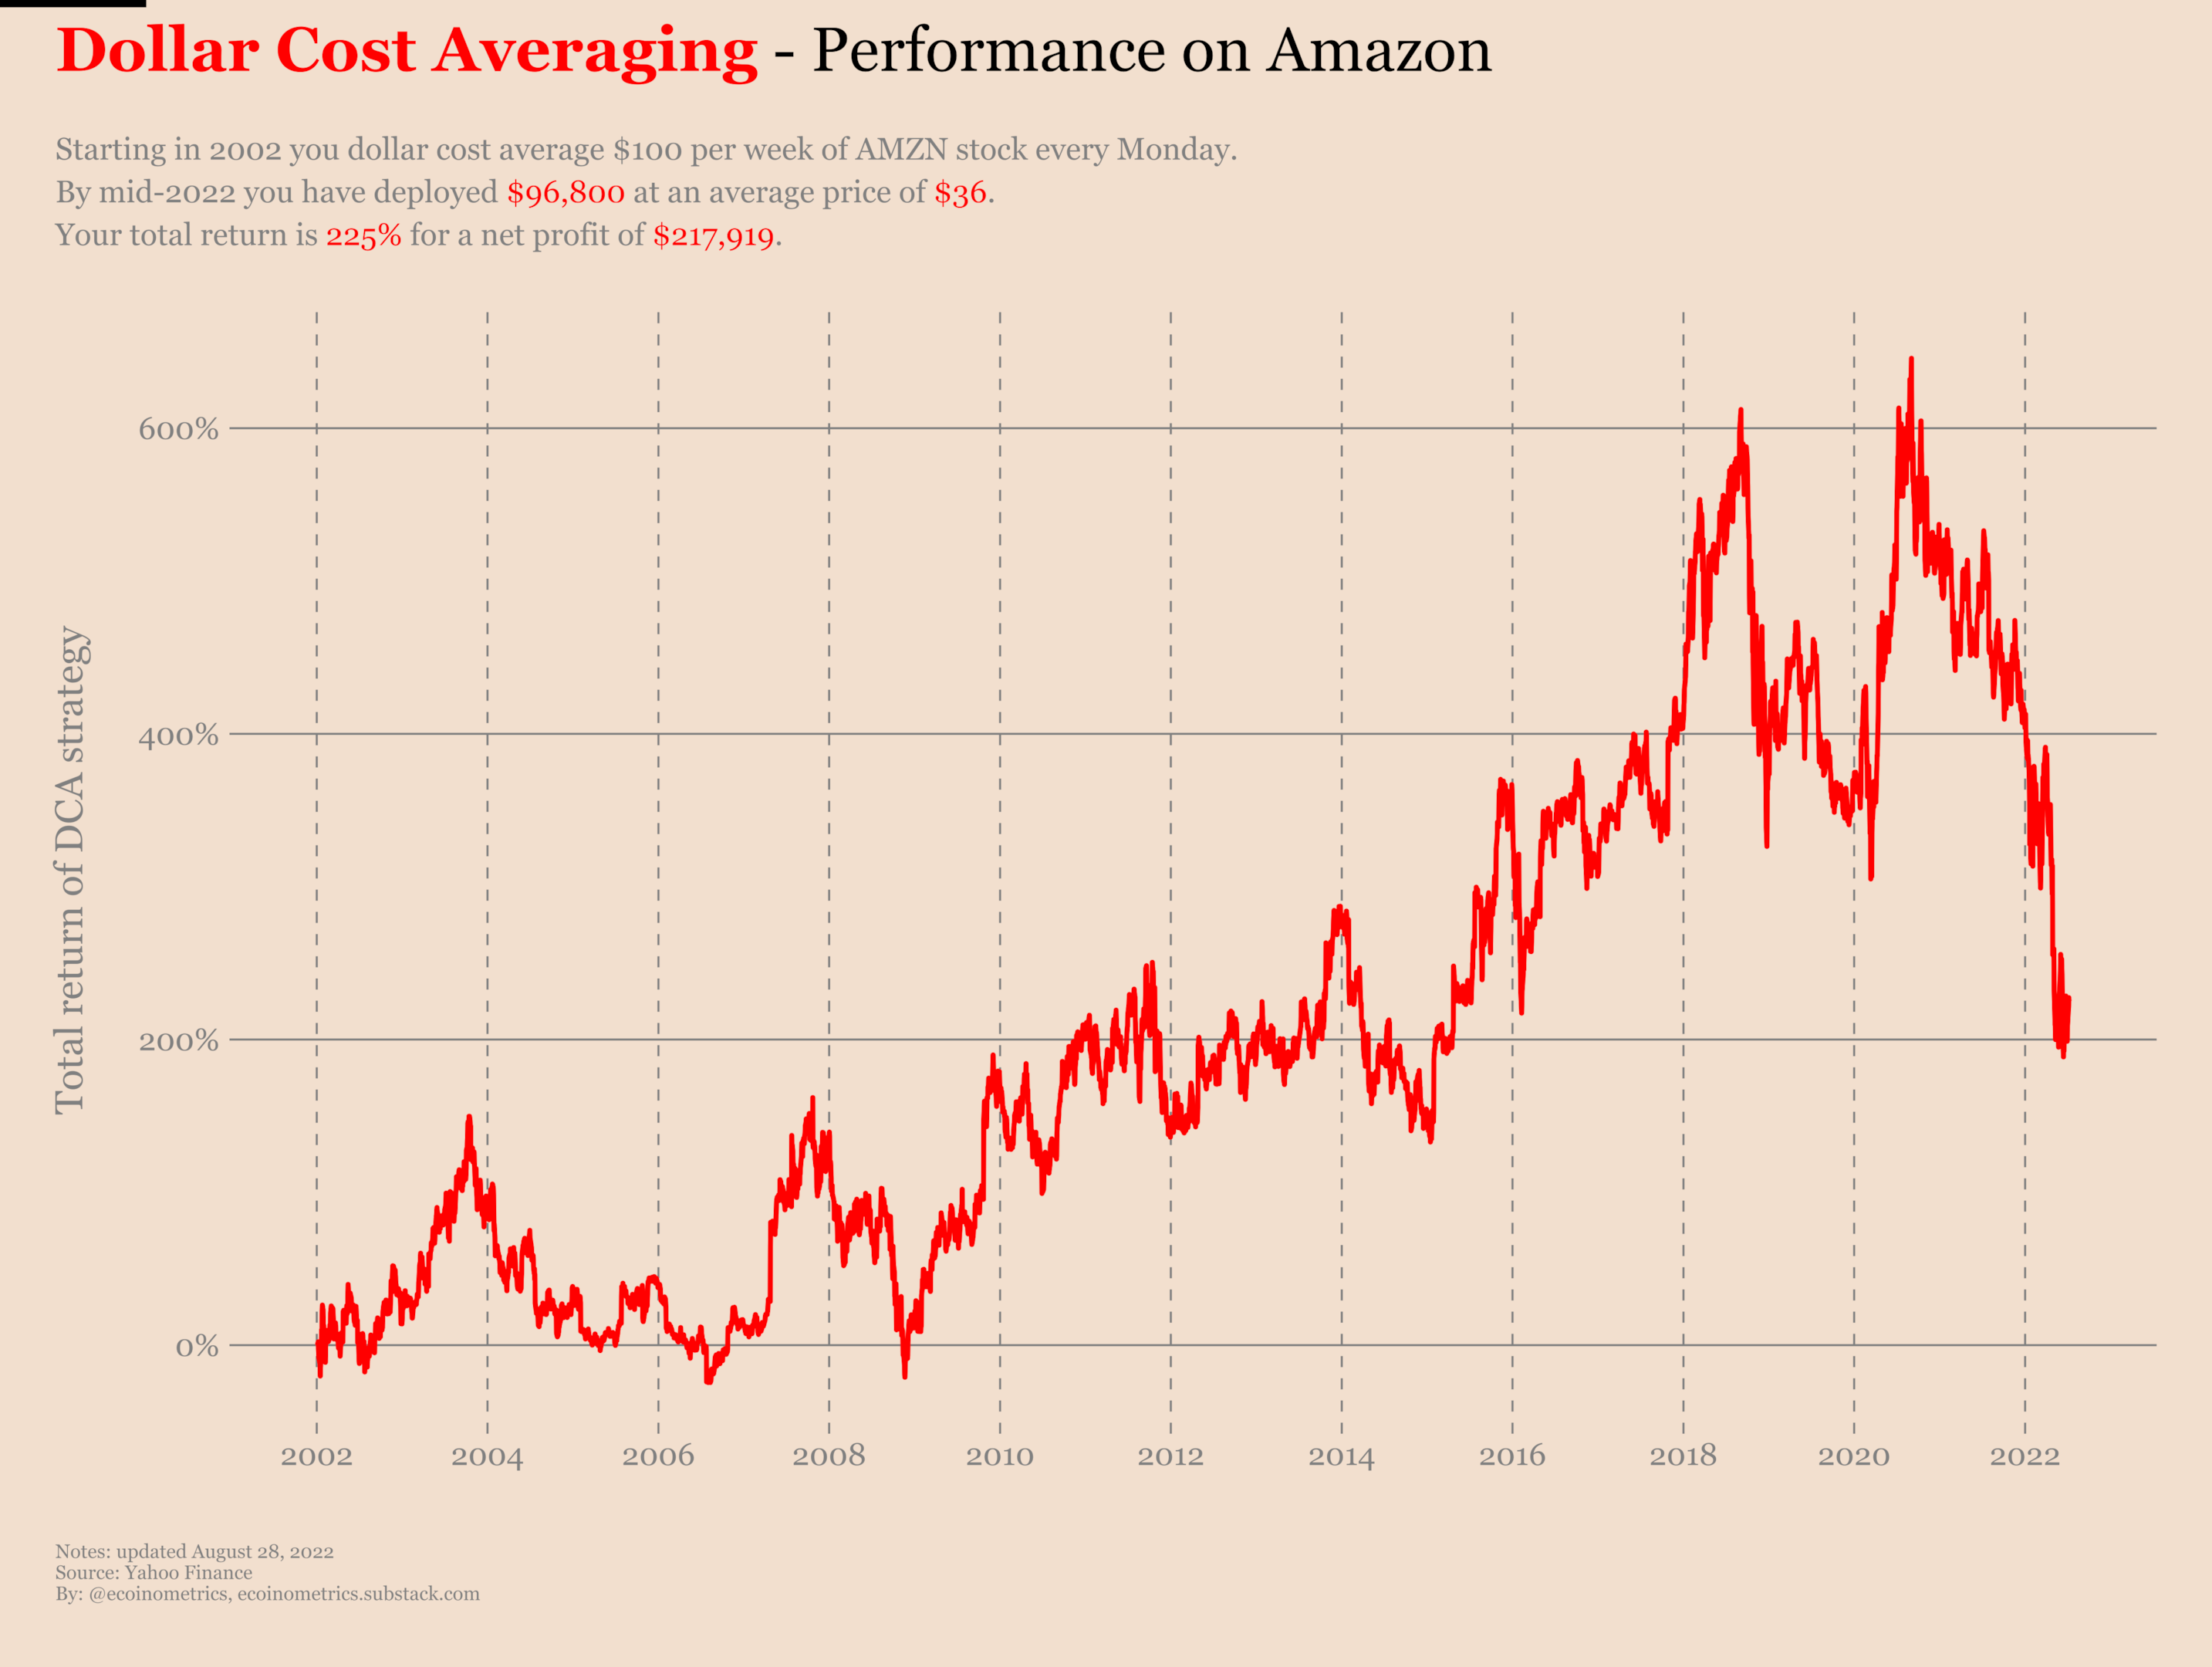 Performance of dollar cost averaging on Amazon since 2002.